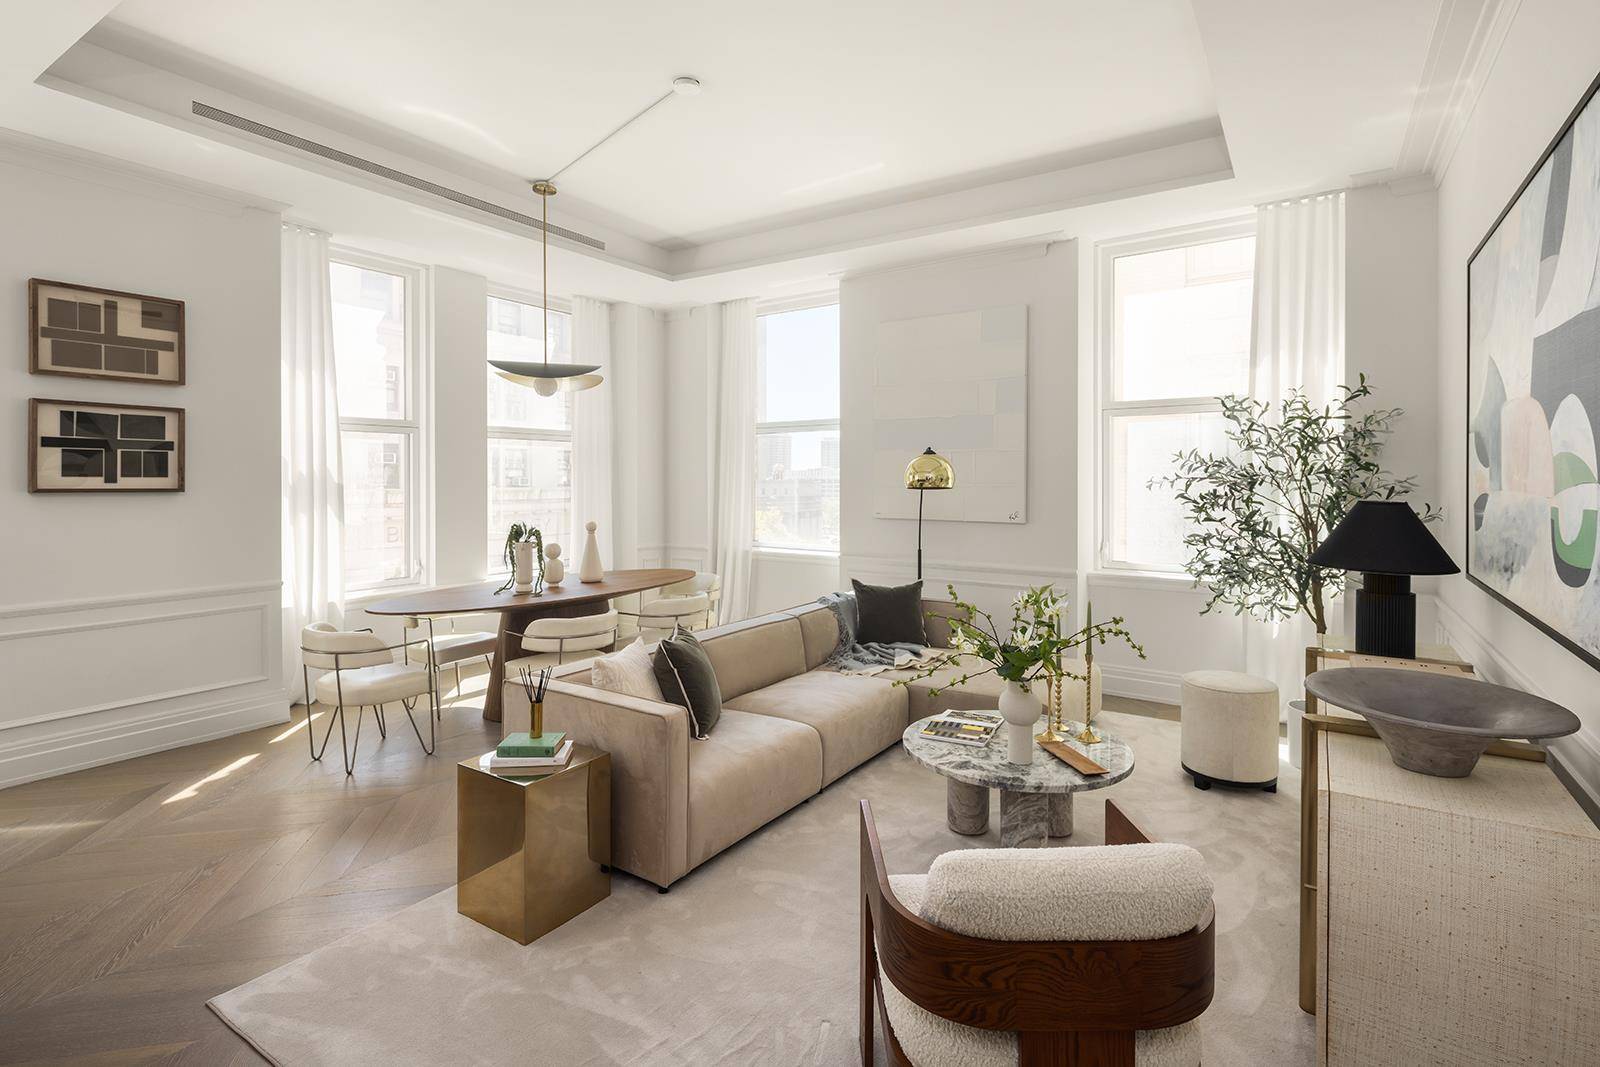 Immediate Occupancy. Paying homage to the most coveted elements of an architectural masterpiece at 108 Leonard, ornamental majesty and historic provenance are leveraged anew with fresh modern forms and contemporary ...